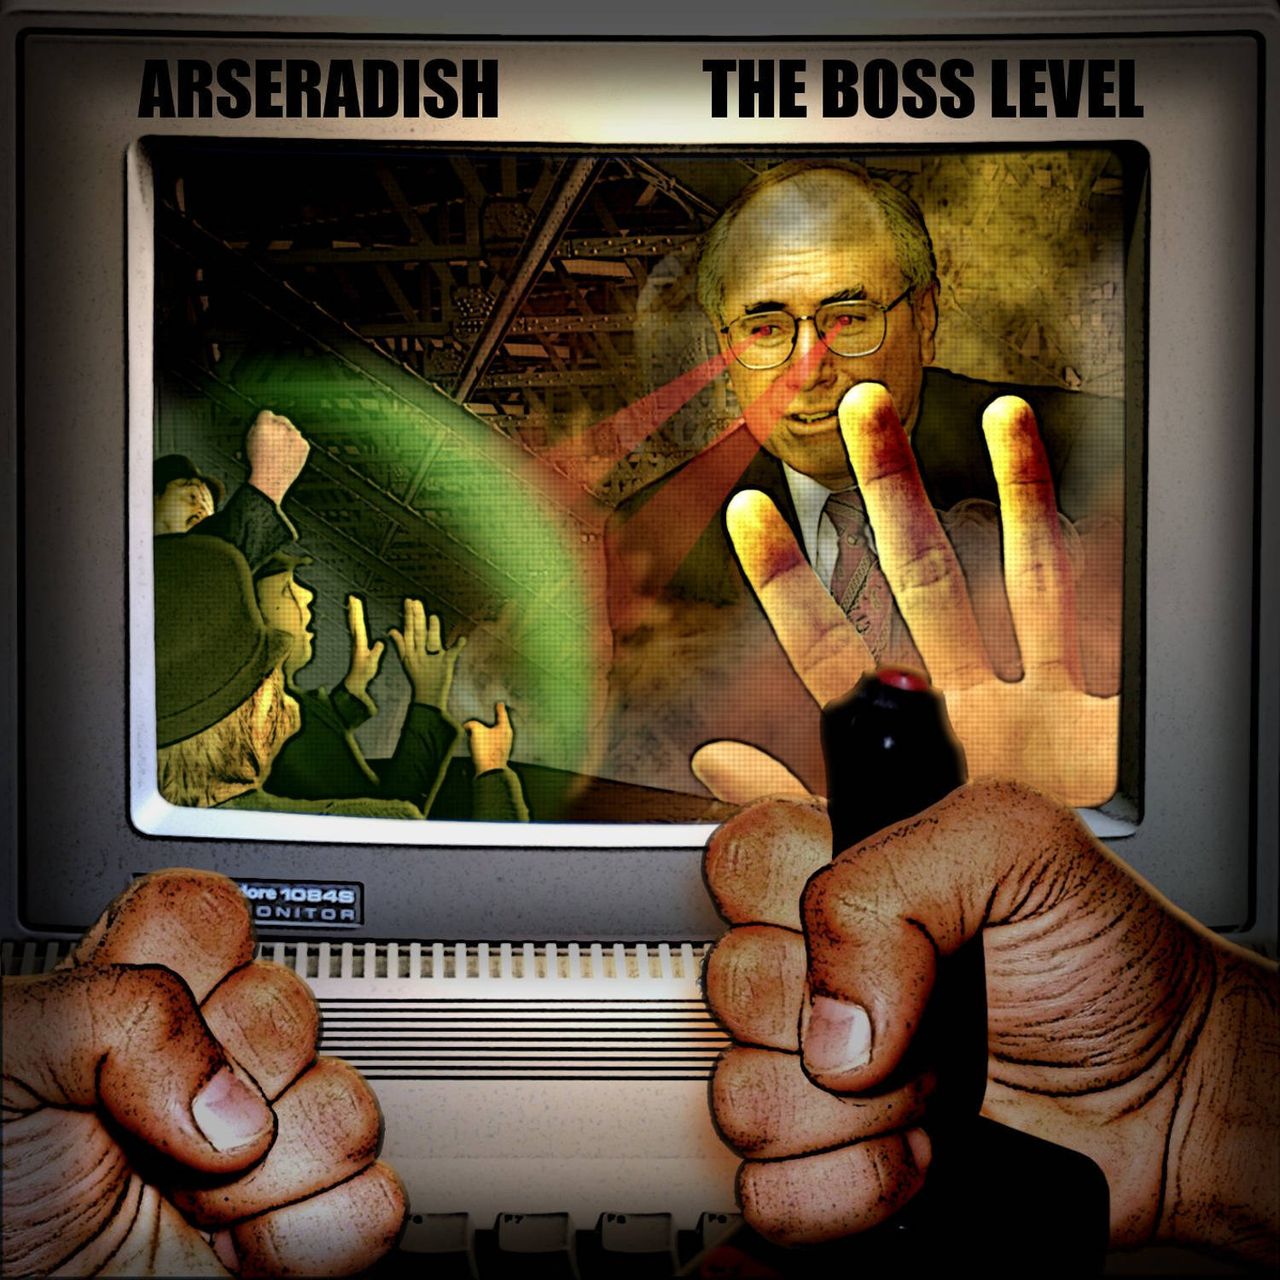 John Howard attempts to use his super laservision to defeat Arseradish in a battle that he must surely lose!